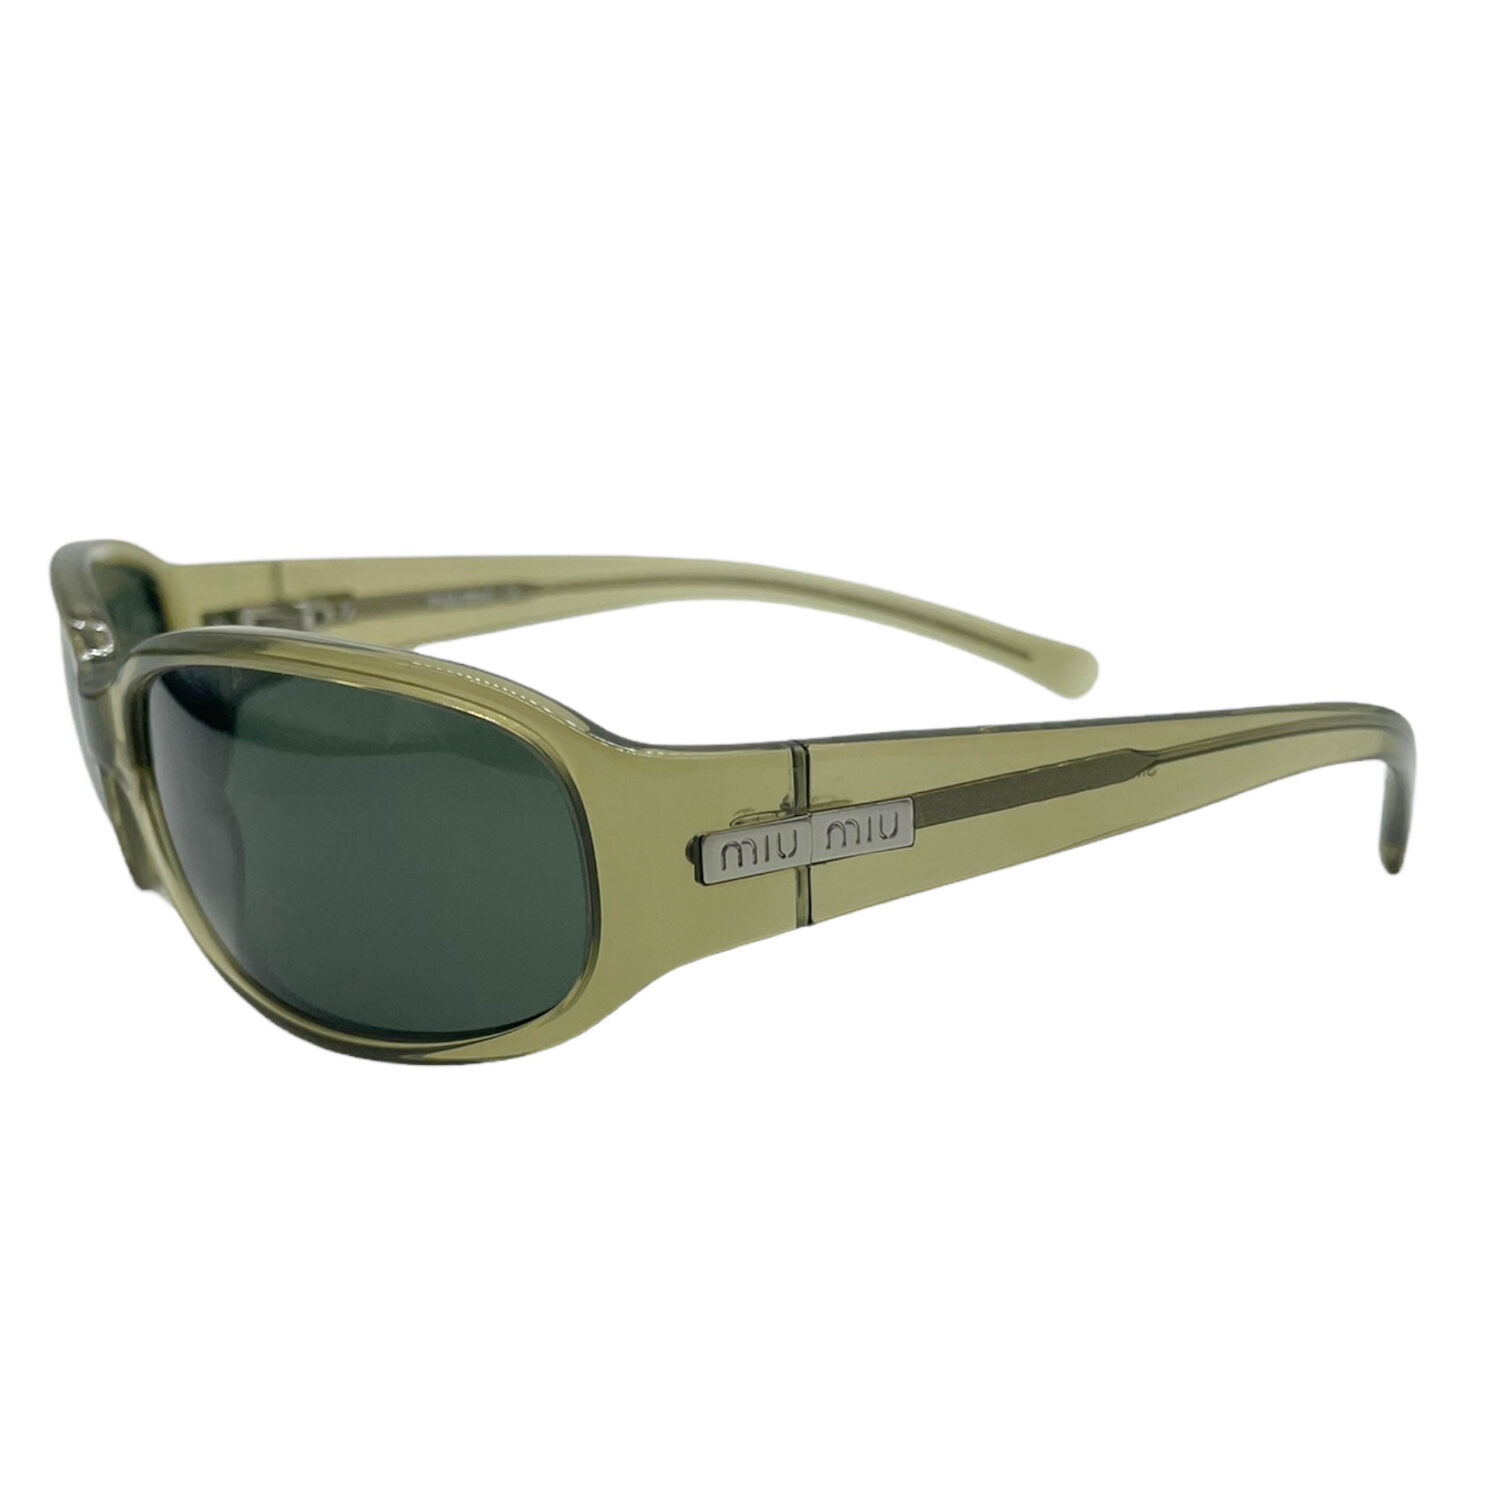 Vintage Miu Miu Chunky Translucent Sunglasses in Olive Green and Silver | NITRYL